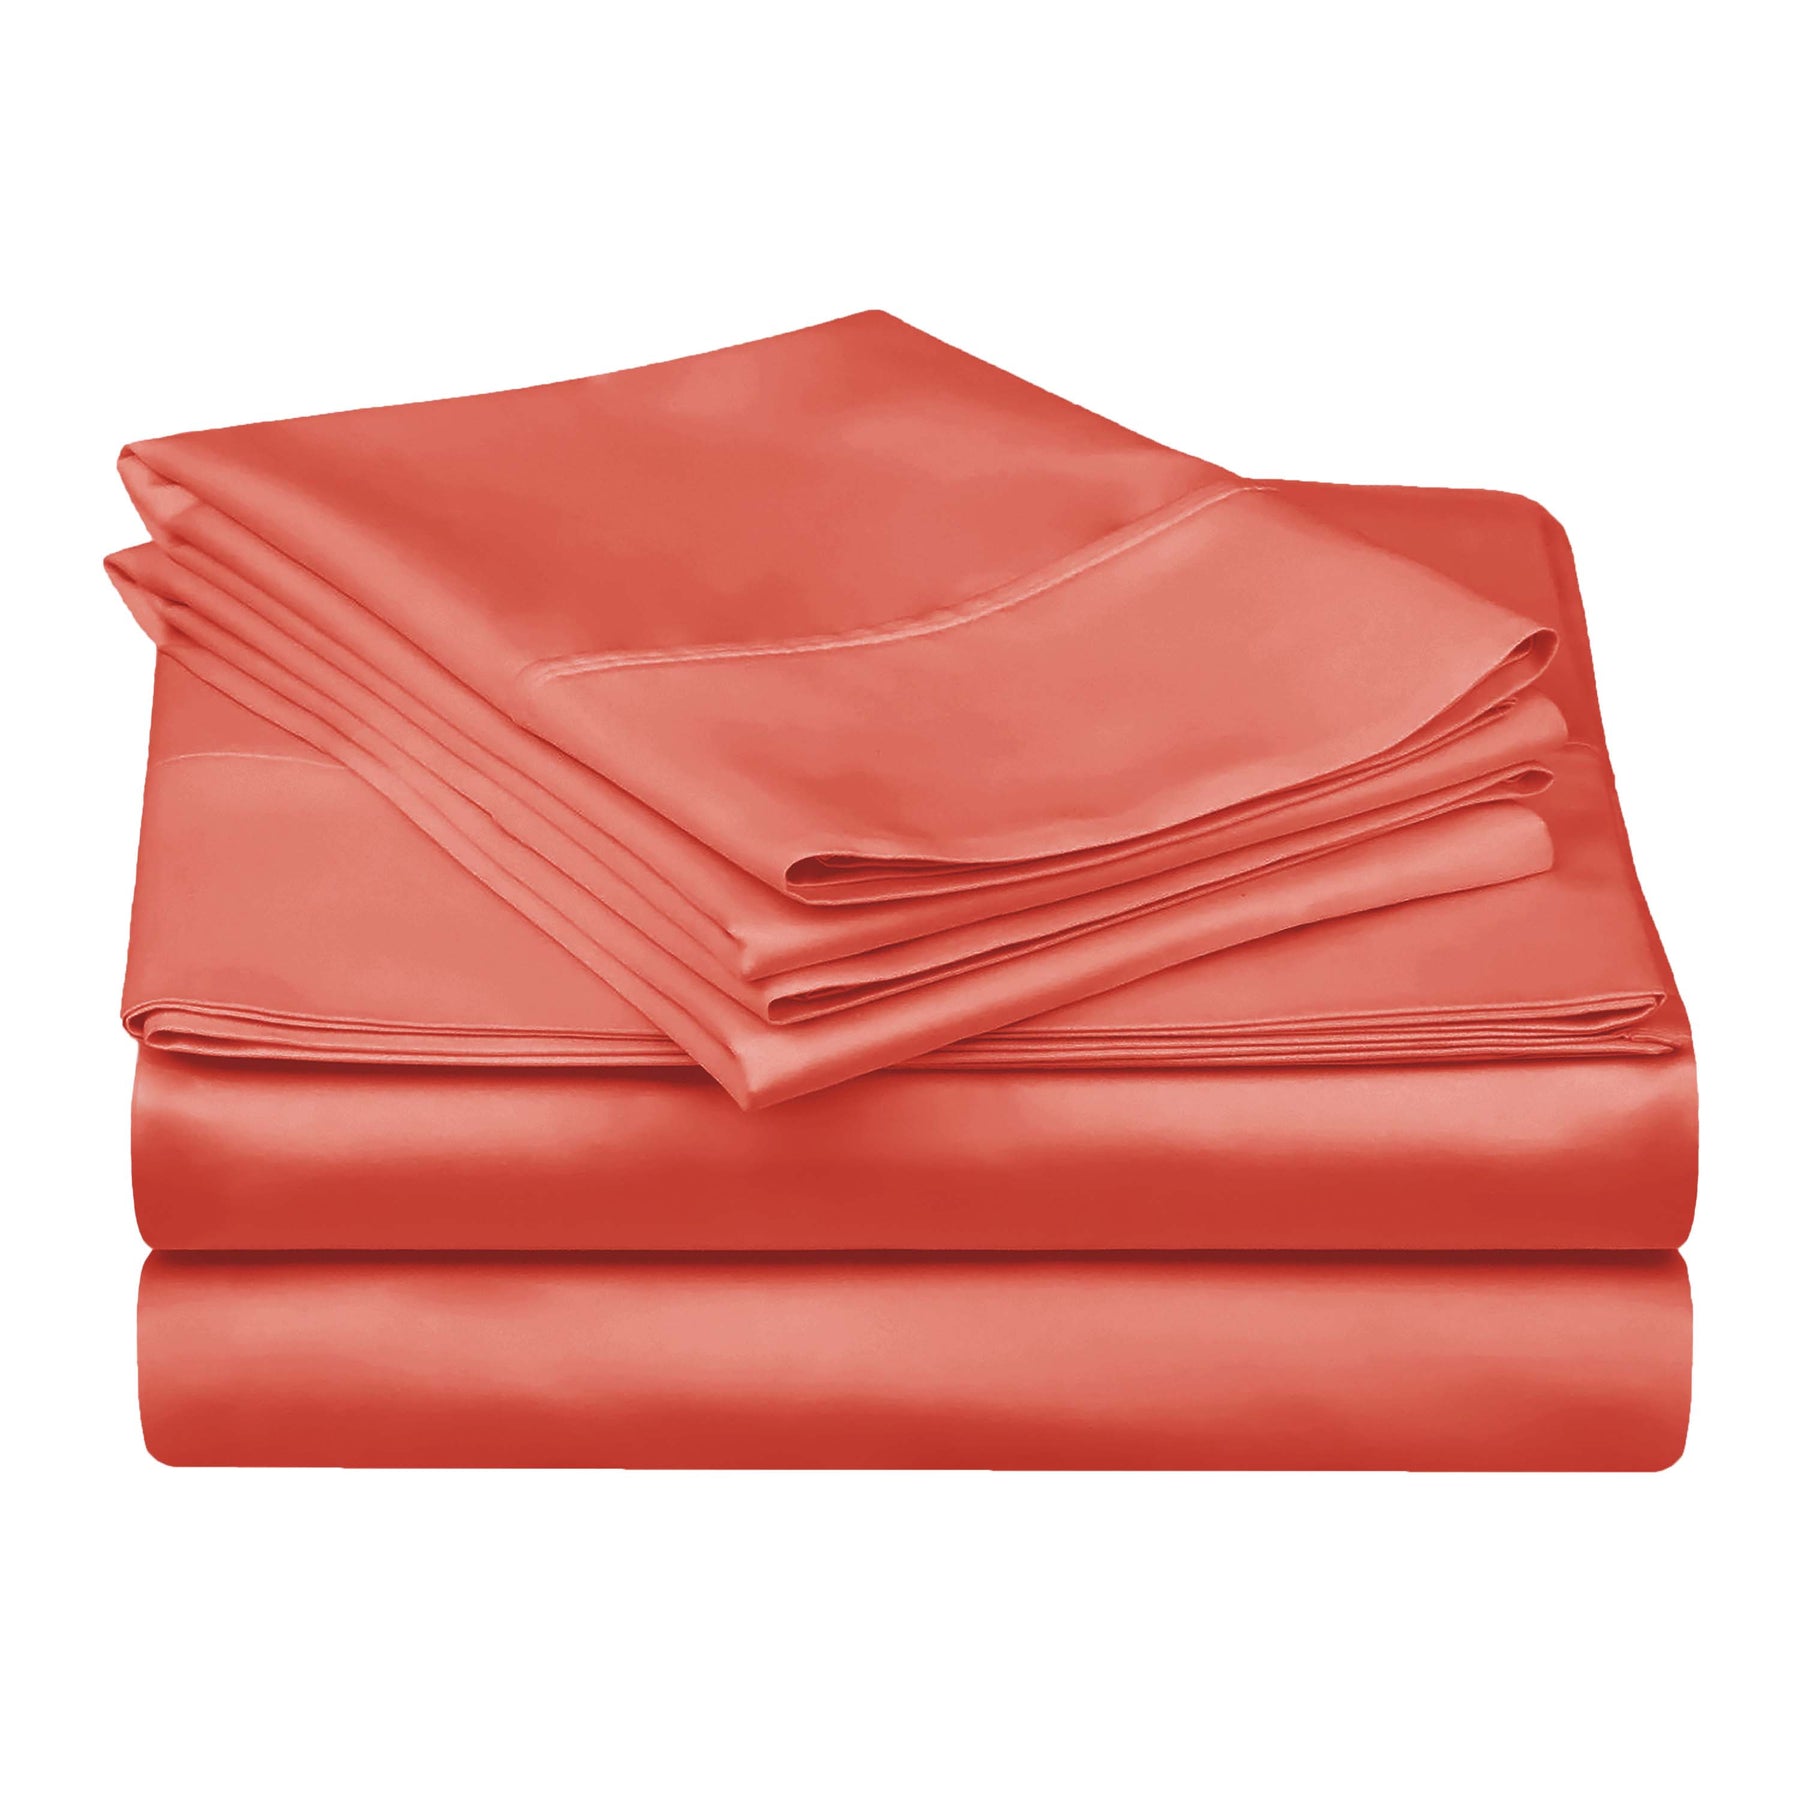 Egyptian Cotton 300 Thread Count Solid Deep Pocket Sheet Set - Coral